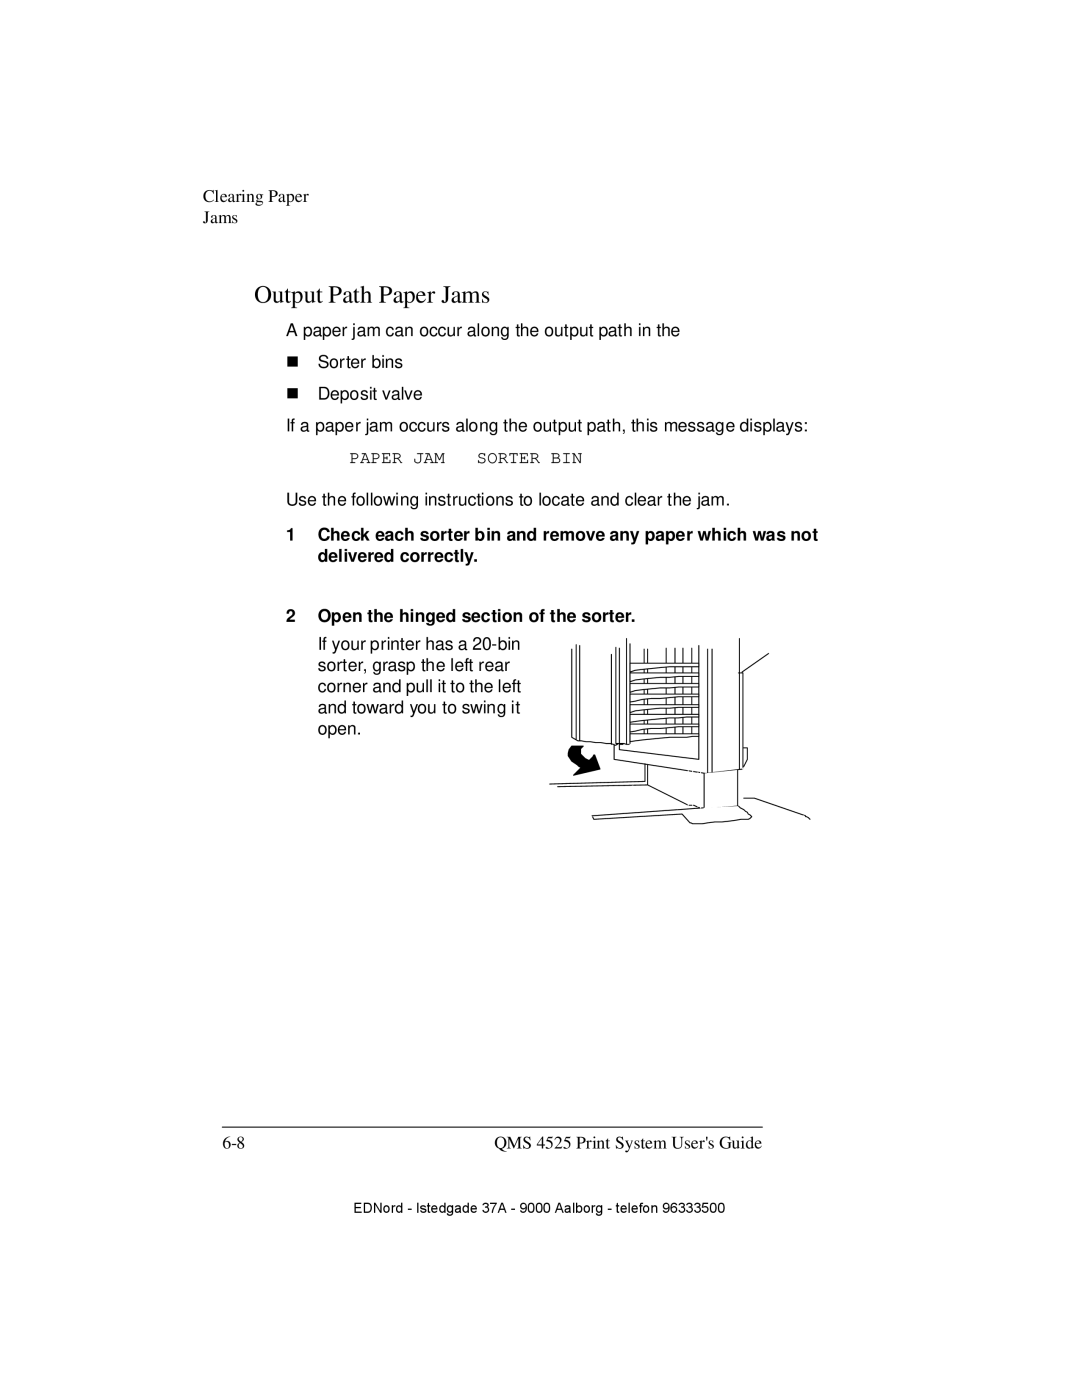 IBM QMS 4525 manual Output Path Paper Jams, Open the hinged section of the sorter 